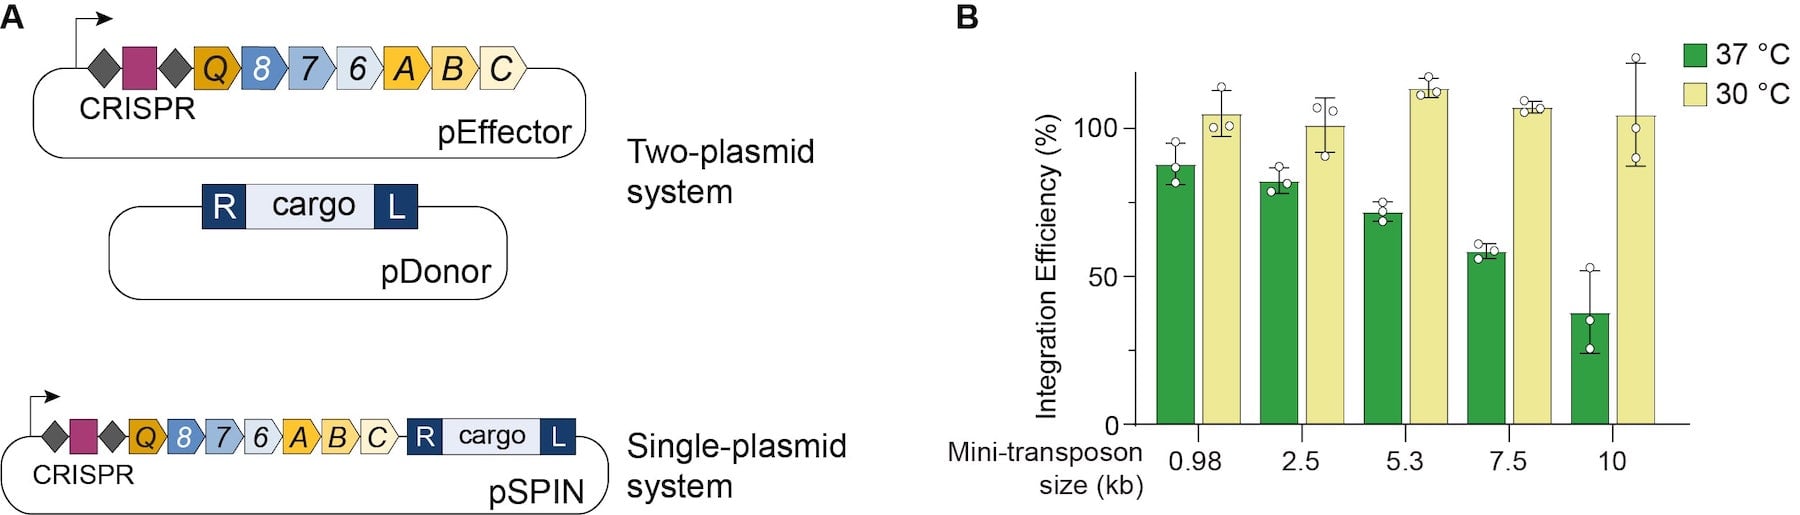 Left: the VchINT expression system is a one or two plasmid system that brings the CRISPR array, CRISPR proteins, transposase proteins, and donor cargo. Right: Integration efficiency remains ~100% at 30C for mini transposons up to 10 kb while at 37C, integration efficiency decreases with increased mini-transposon size.